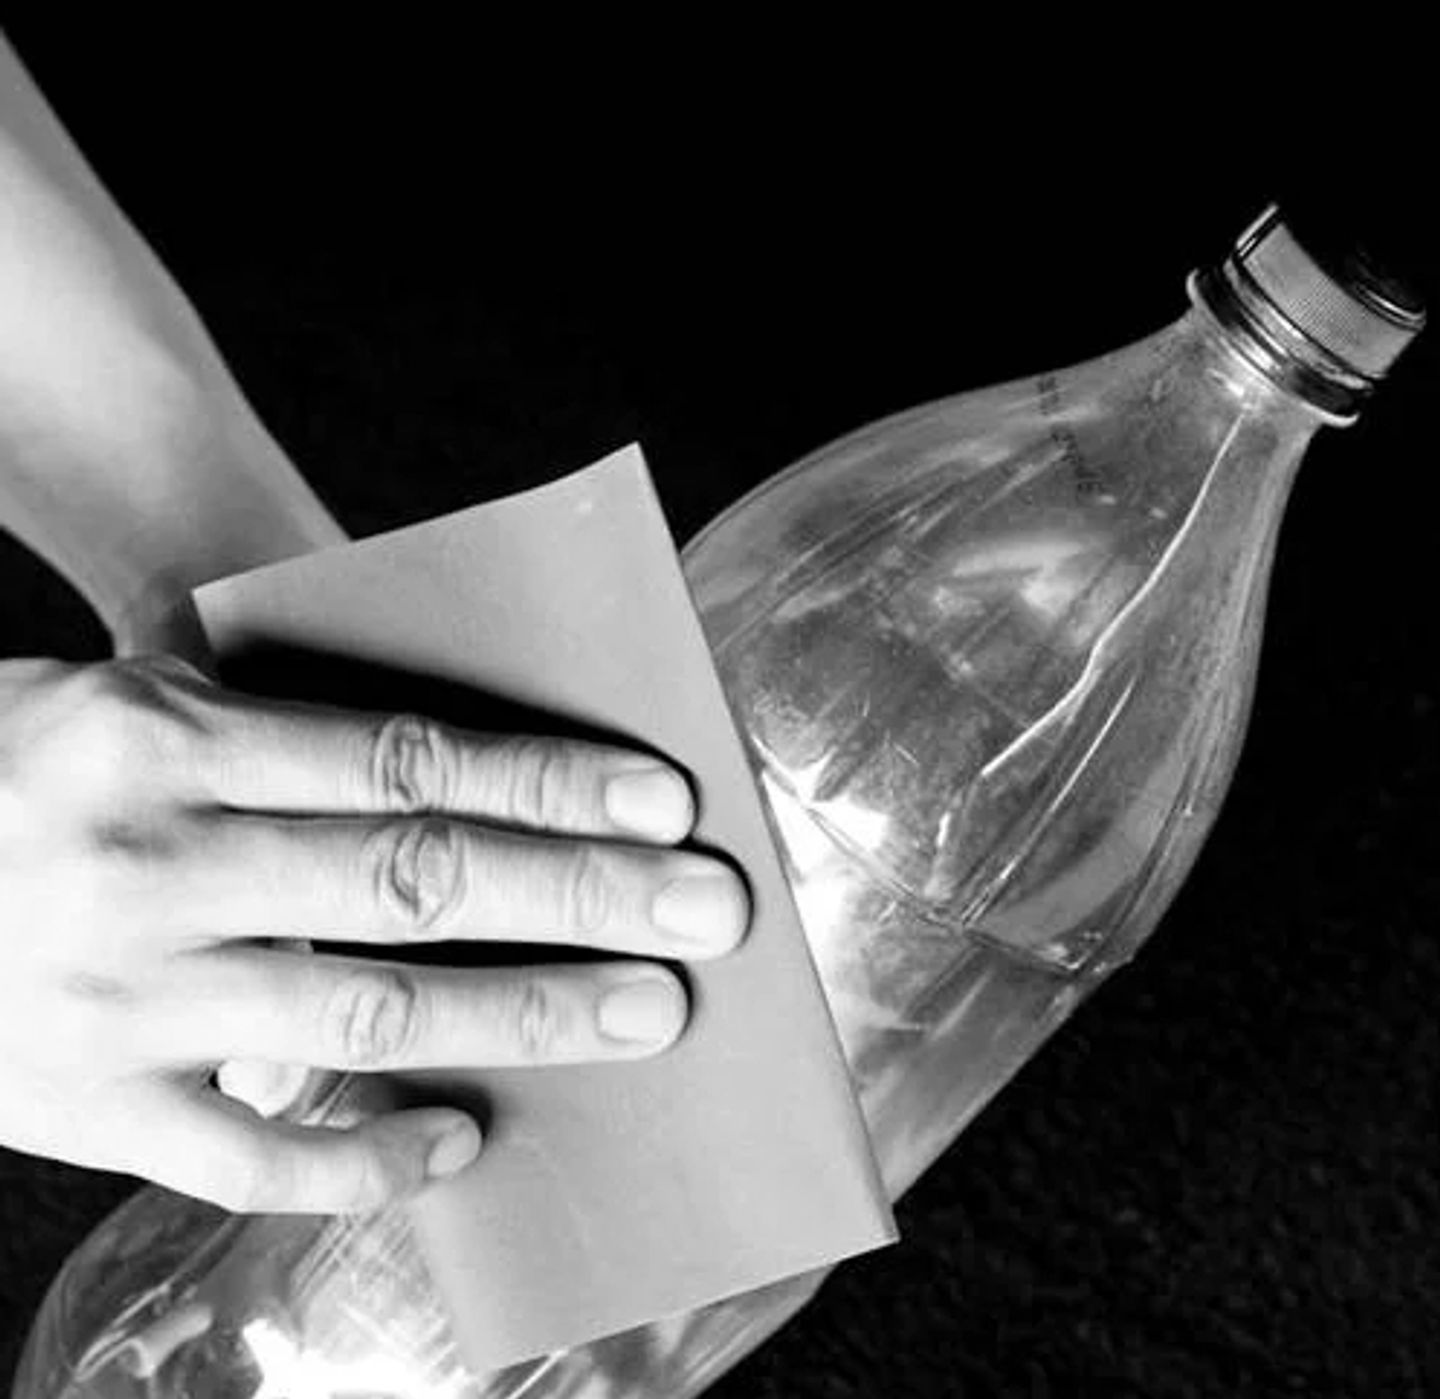 Scratching the surface of the PET bottle with sandpaper